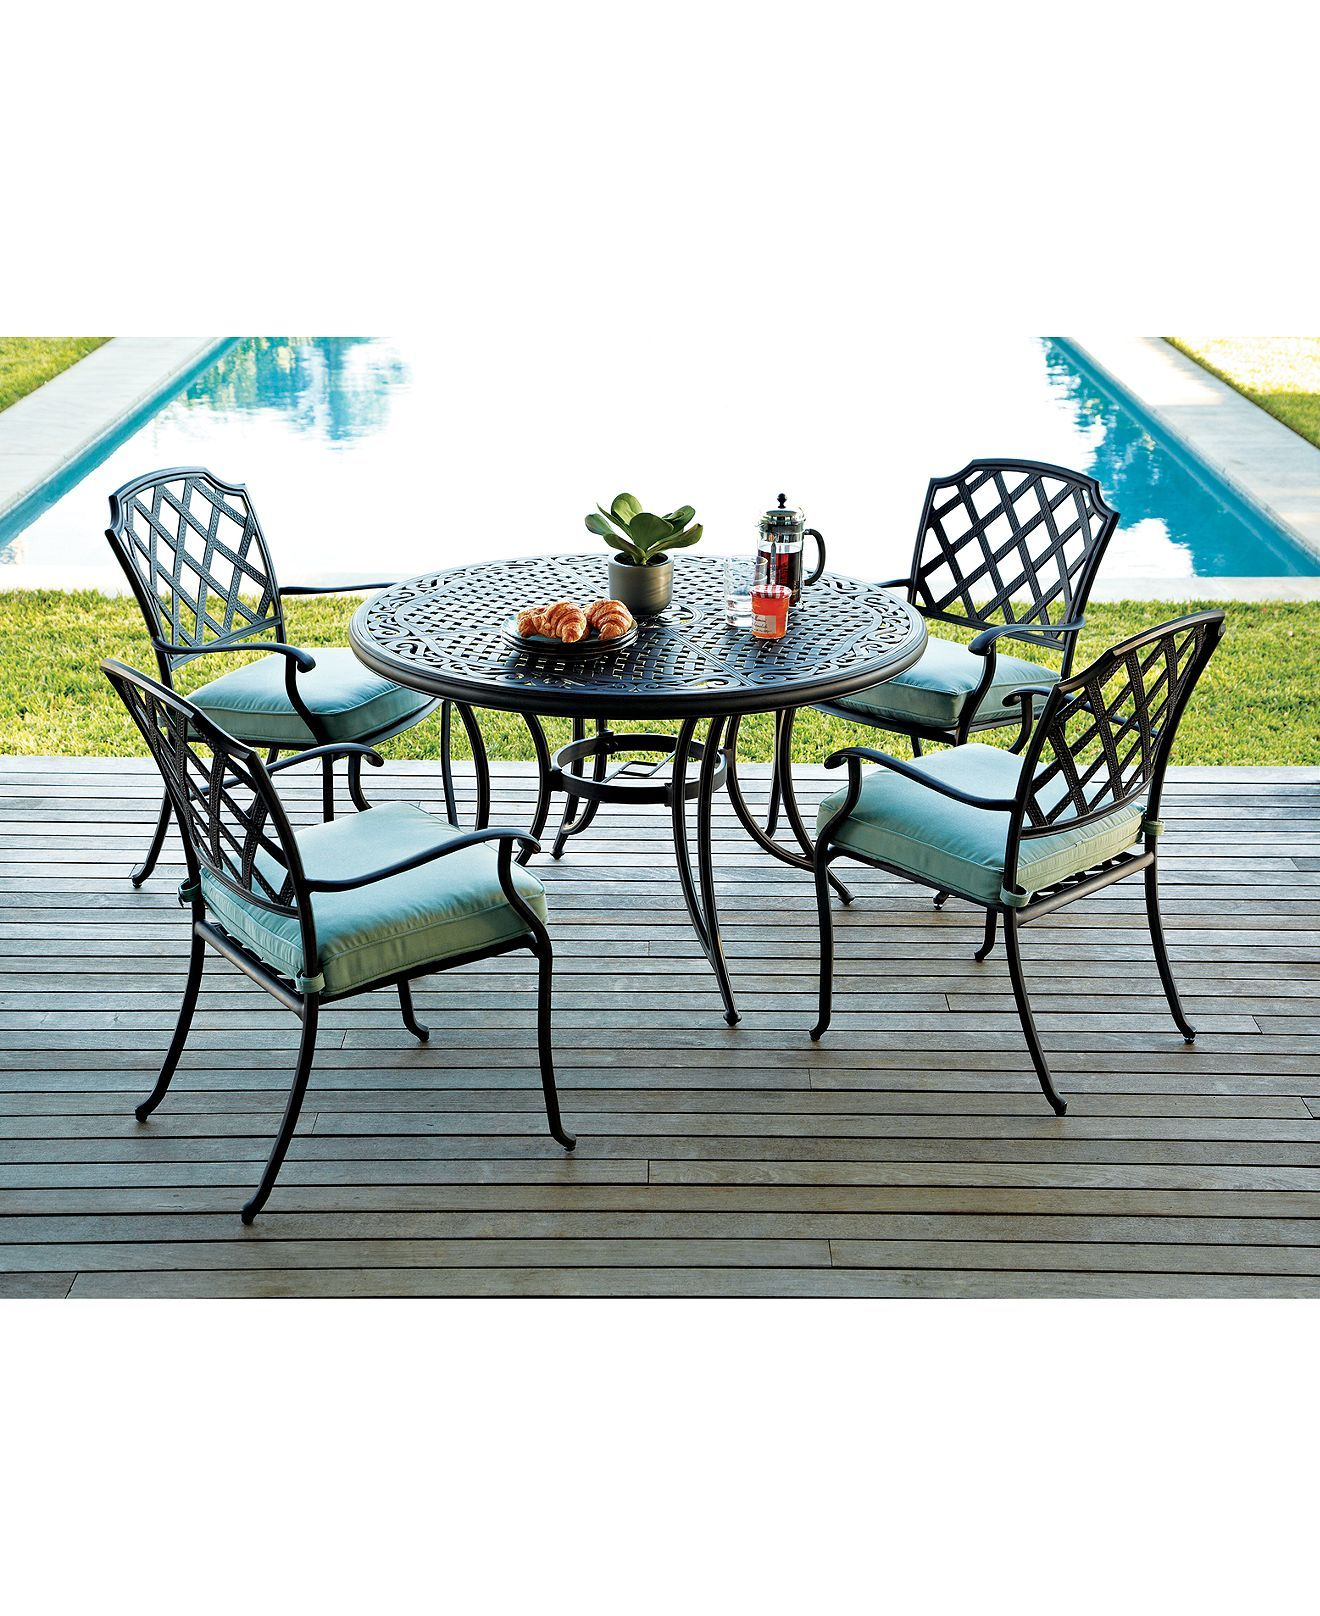 Nottingham Outdoor Patio Furniture Dining Sets Pieces pertaining to sizing 1320 X 1616